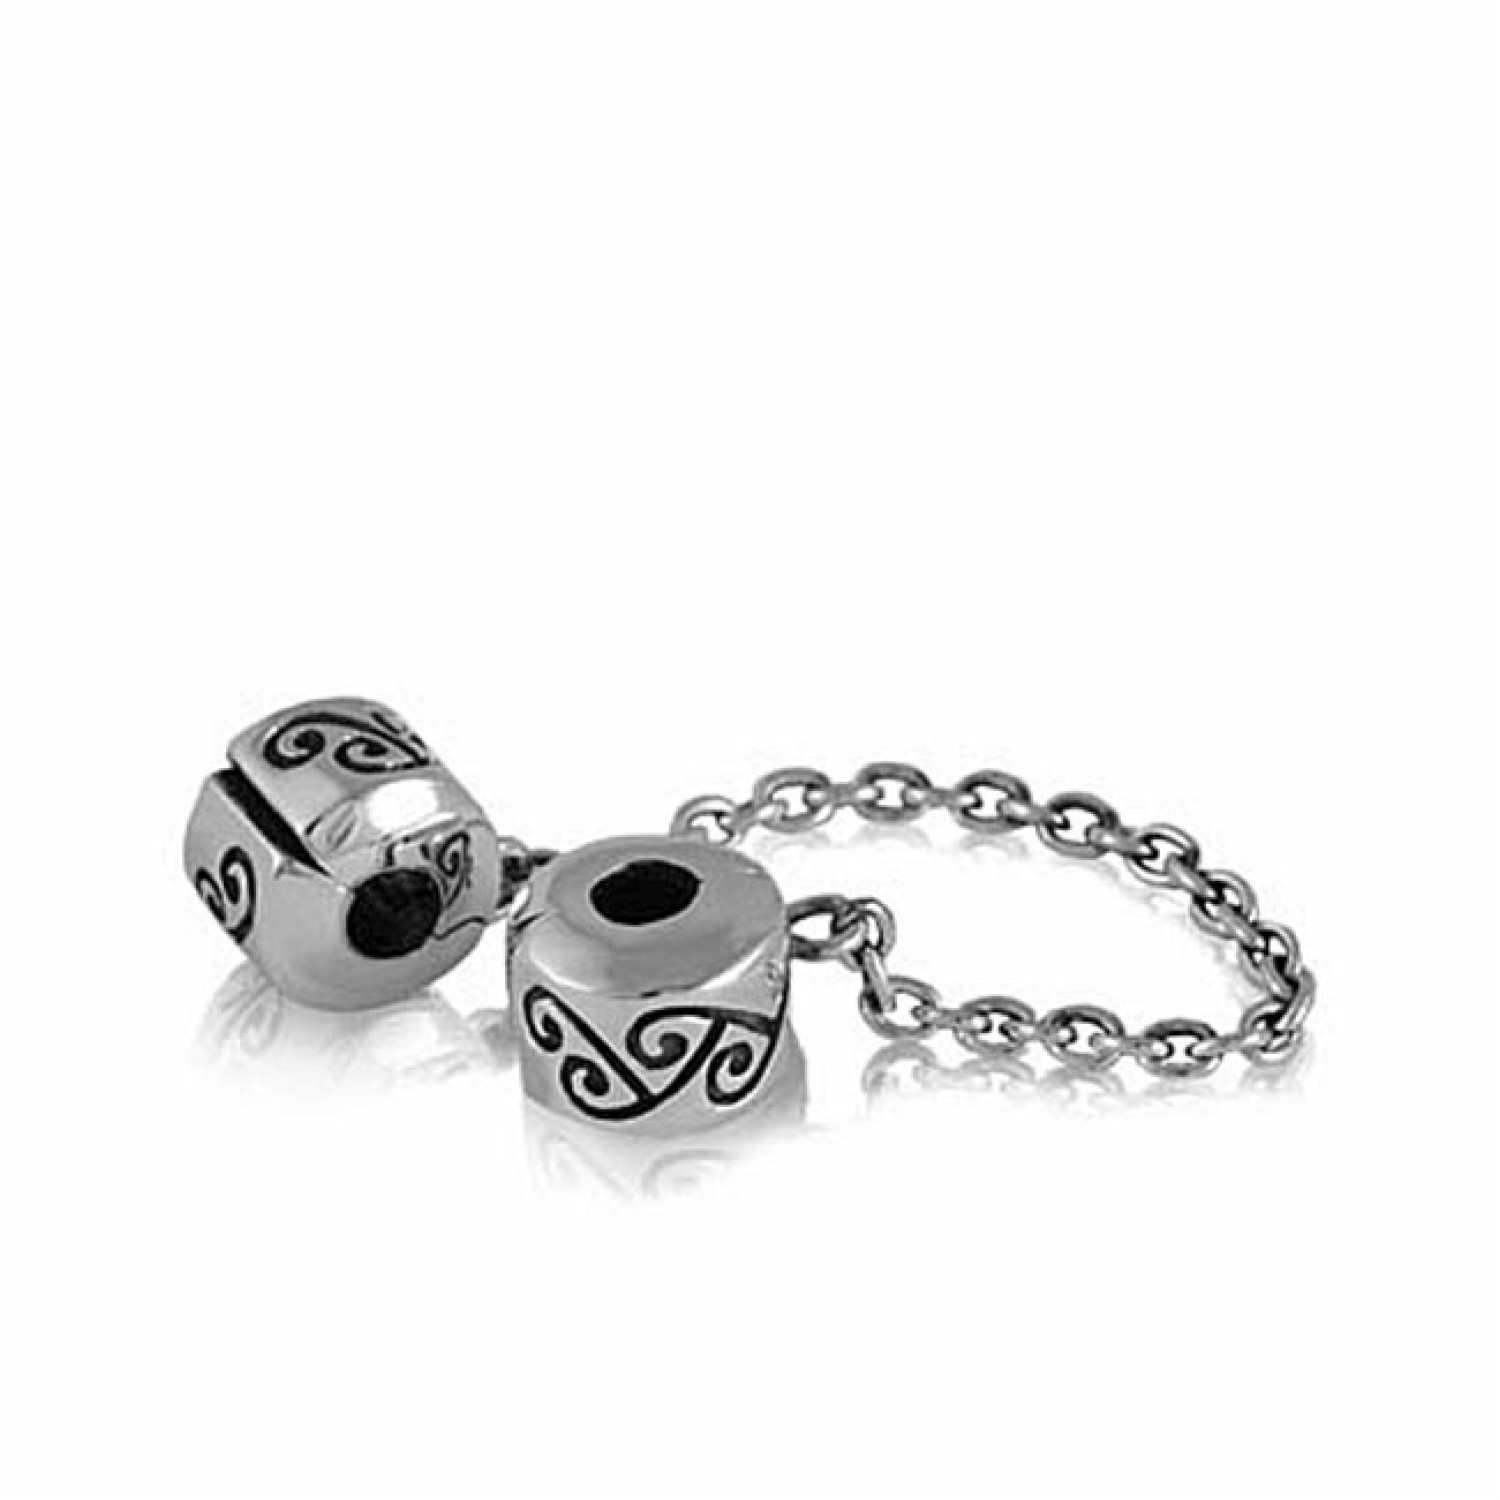 LKC021 Evolve Charms Safety Chain. Evolve Charms New Zealand Safety Chain Dont risk loosing your precious memories. Protect your investment with the Evolve Safety Chain. Sterling Silver to last a lifetime Christies exclusive 5 year guarantee Not c @christ